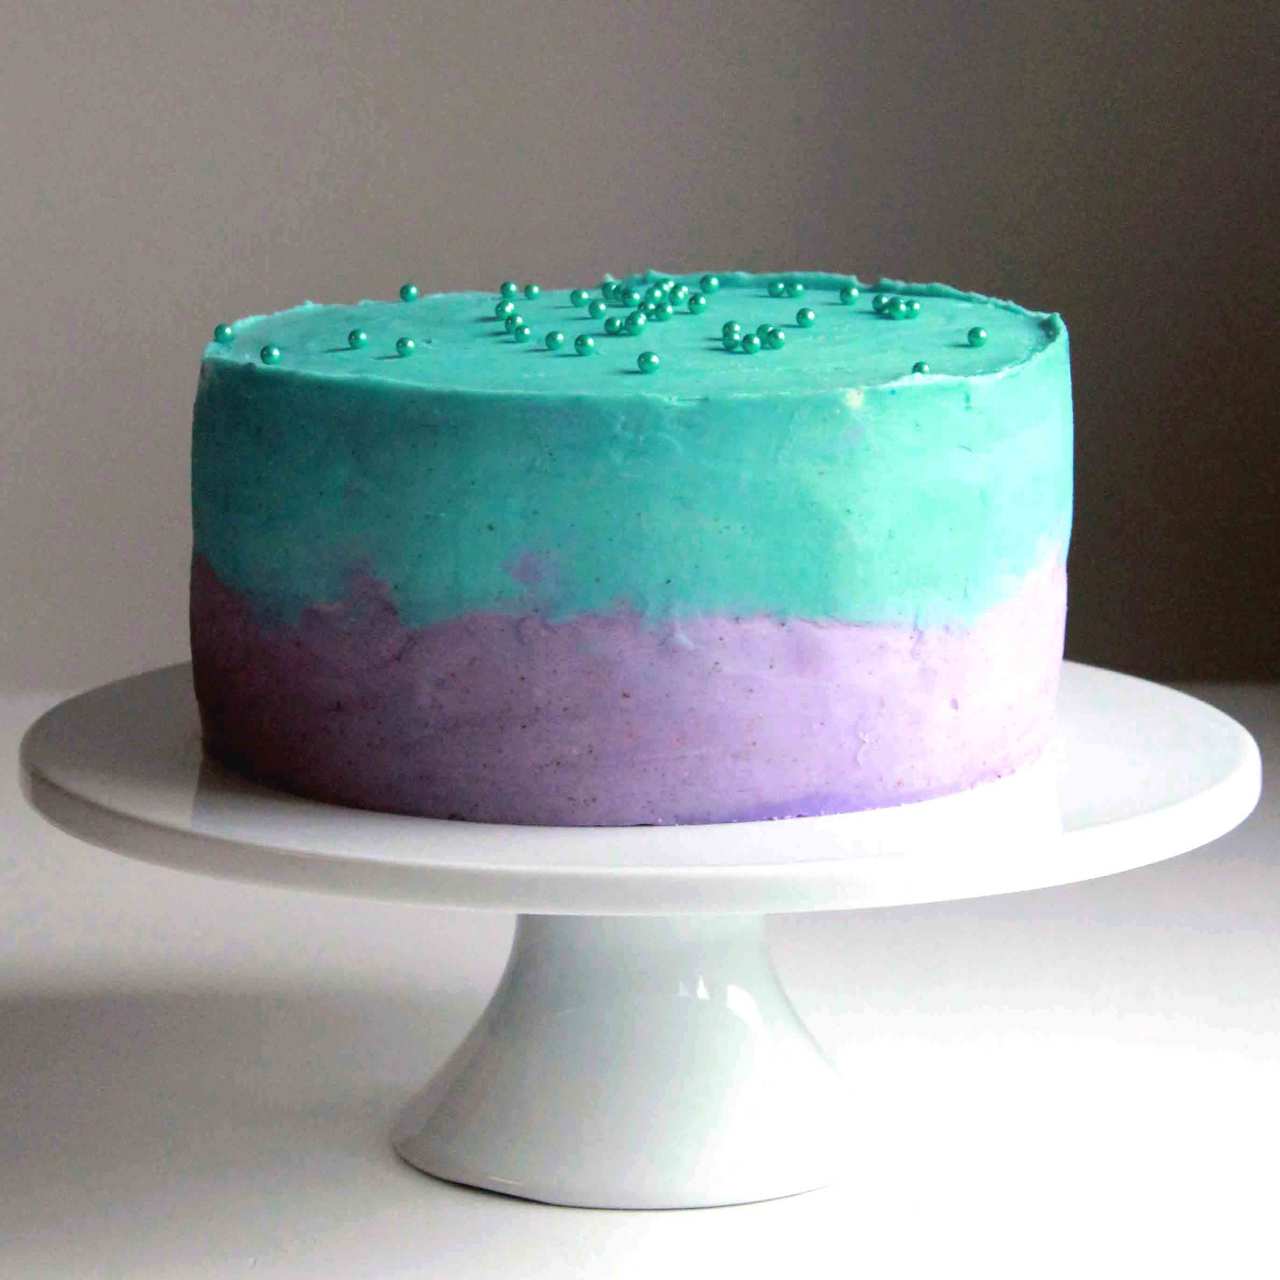 Pretty in Pastel - Double Layer - The Cake Eating Company NZ